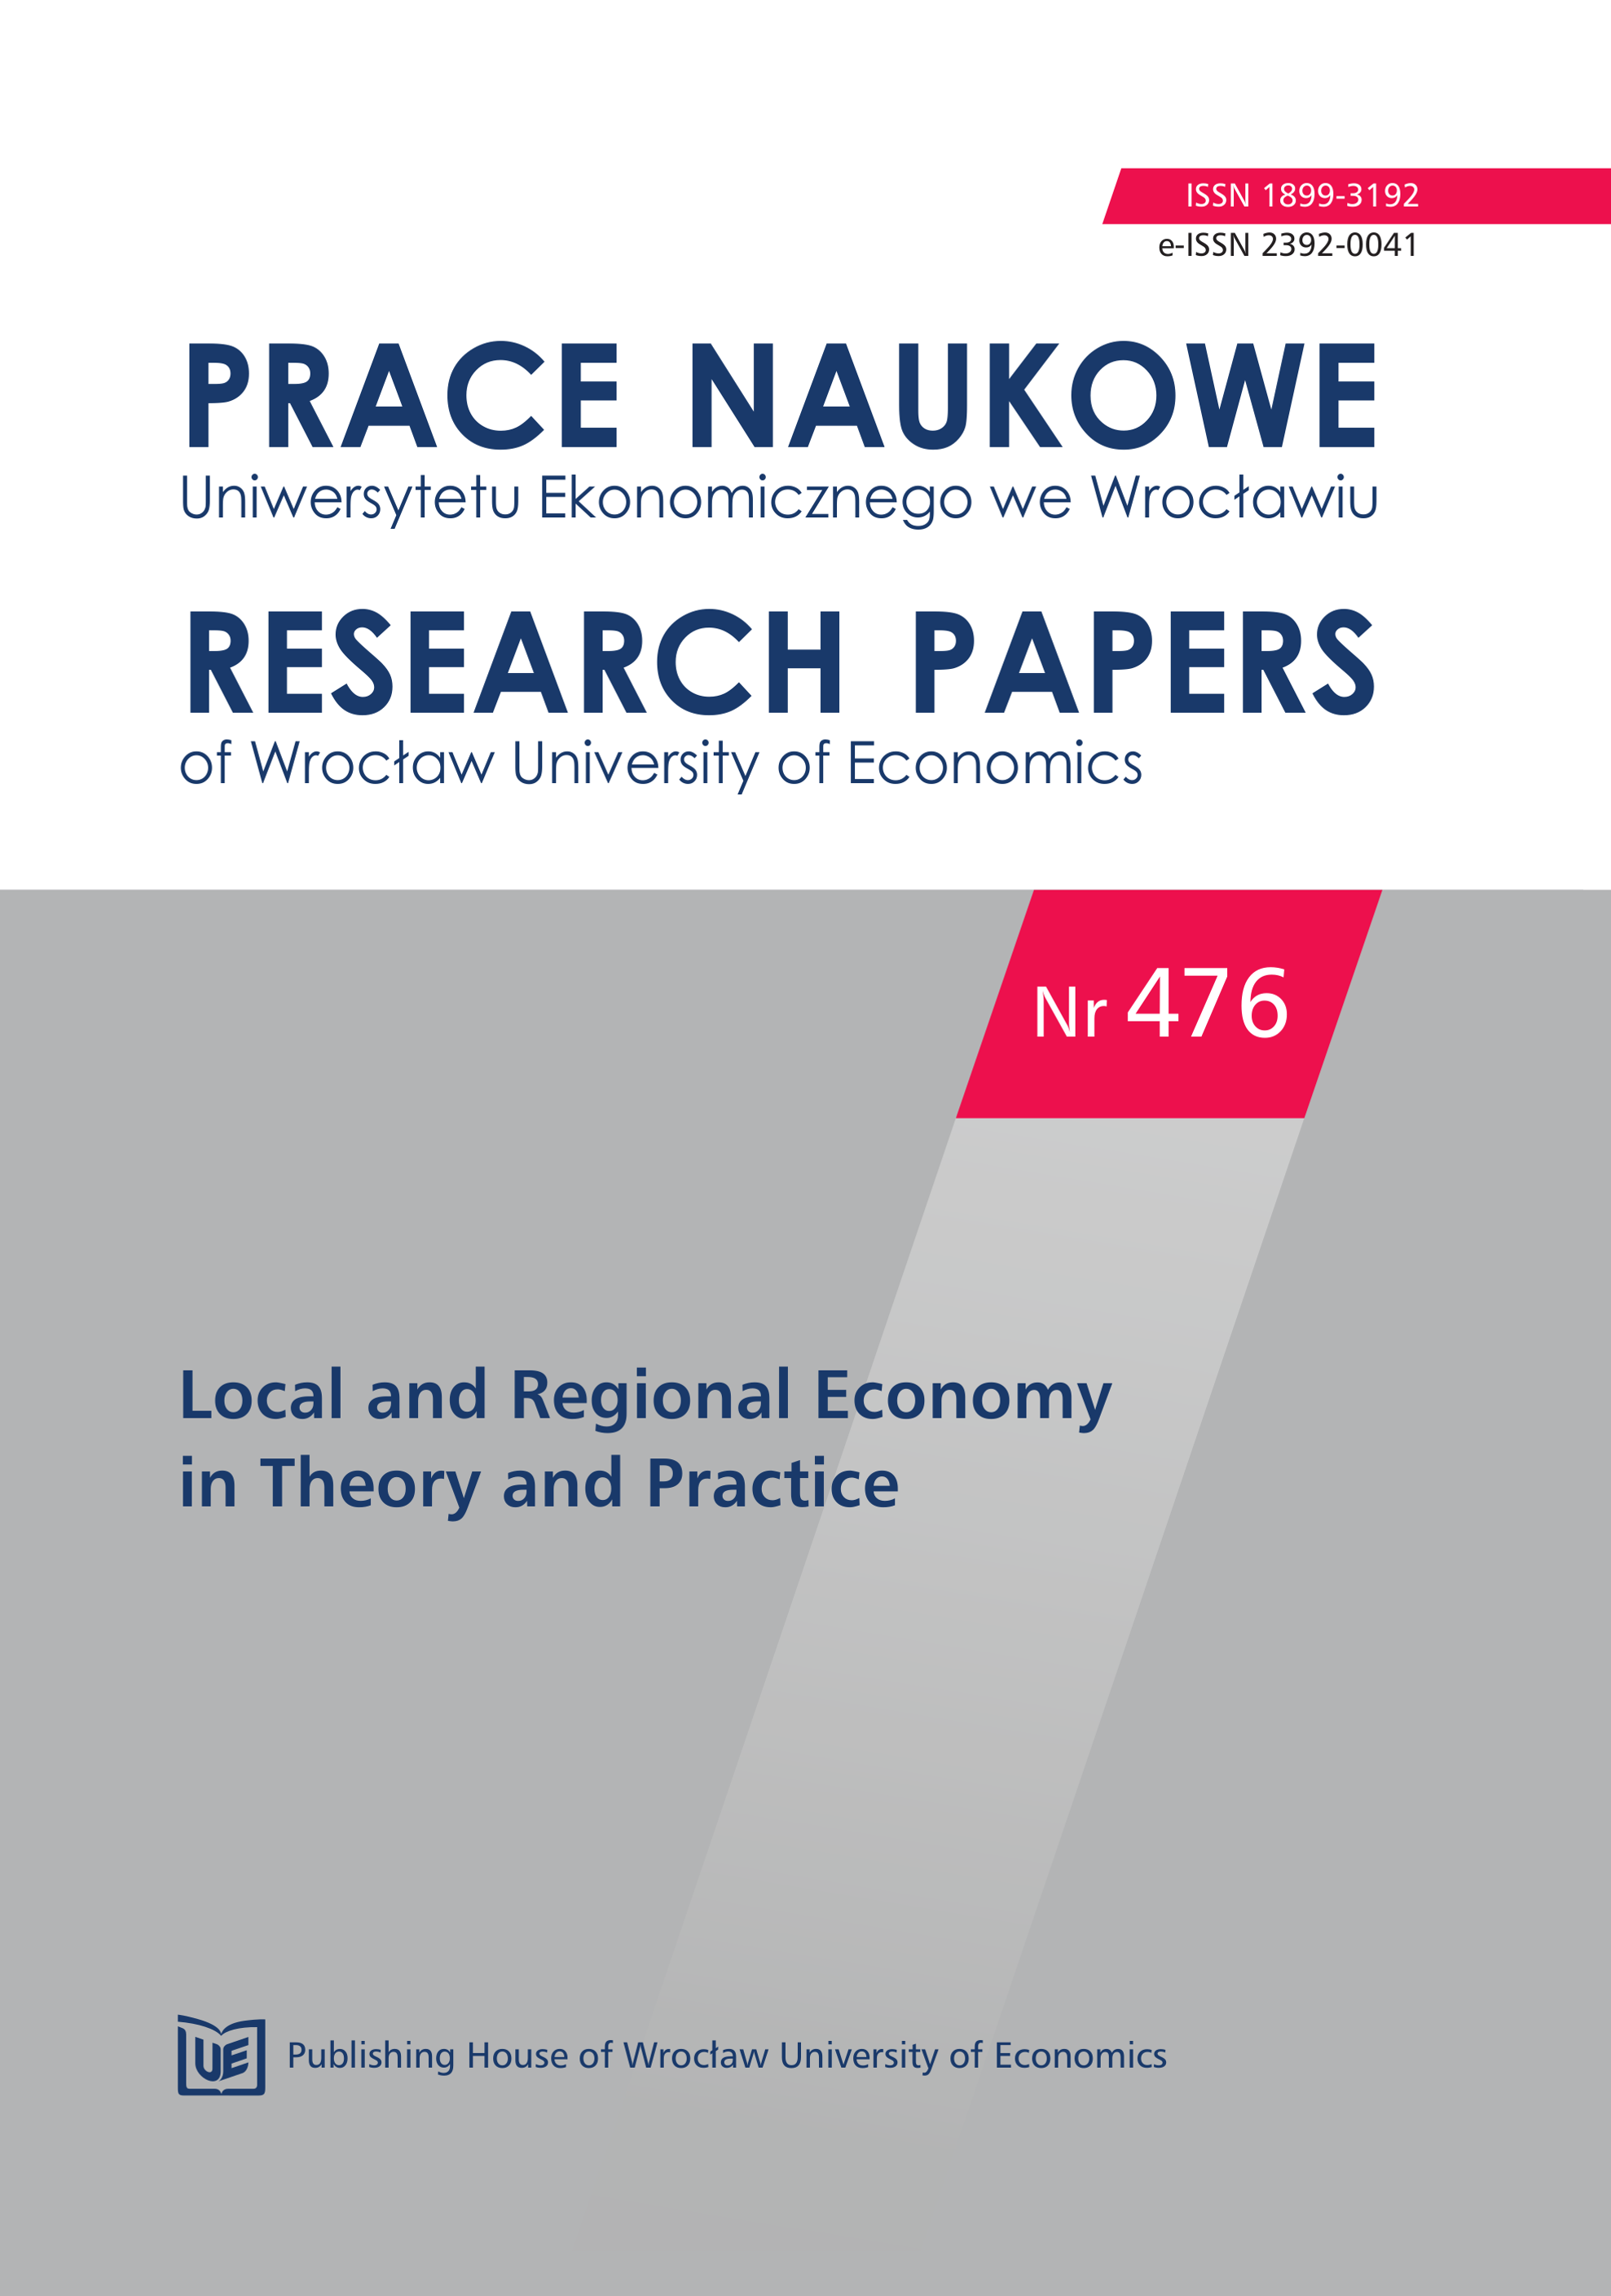 Education specializations of graduates at public and private universities in Greater Poland region Cover Image